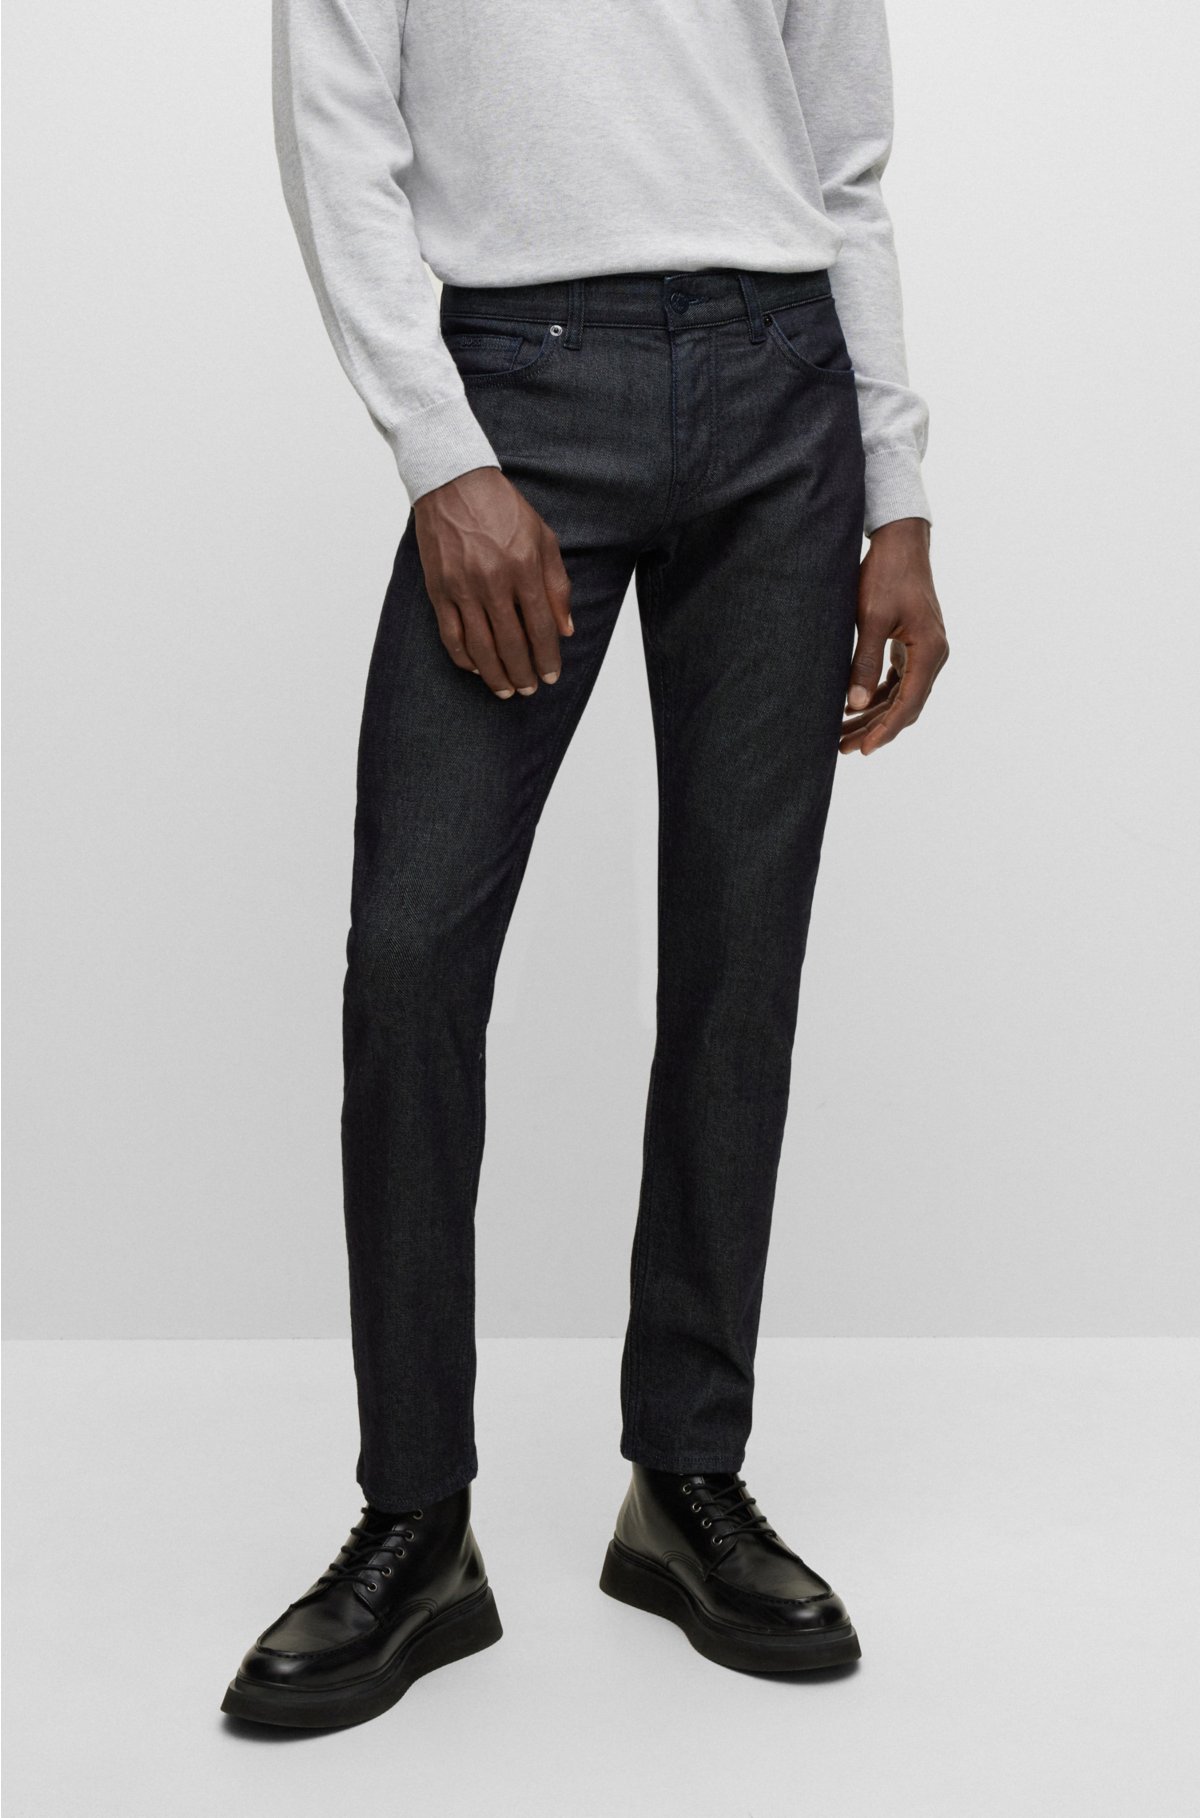 BOSS - Slim-fit jeans in comfort-stretch denim with cashmere